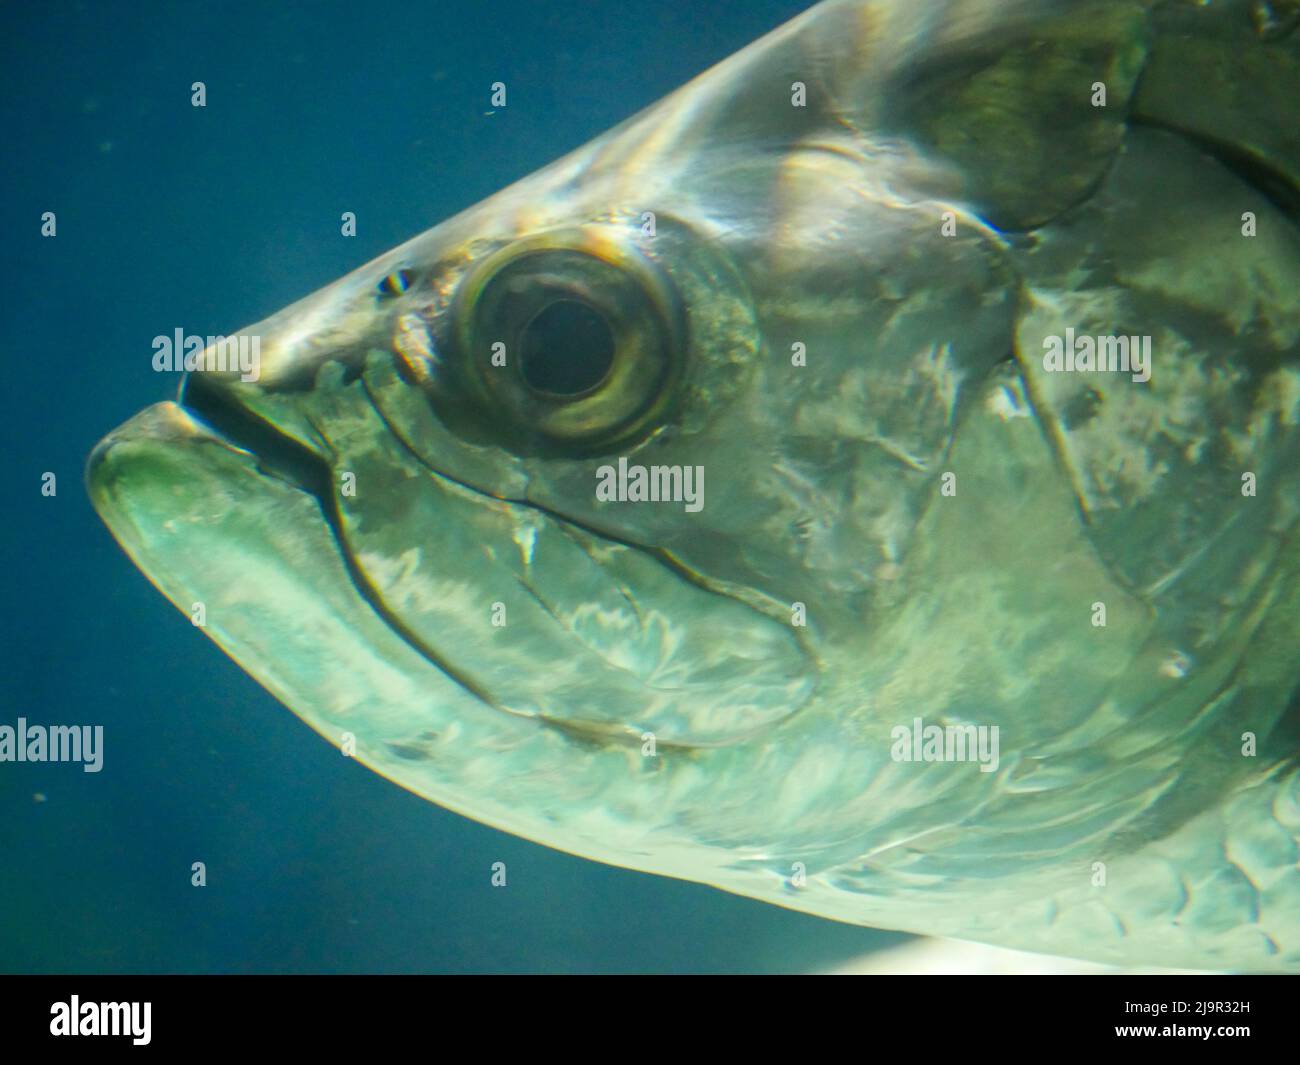 Atlantic tarpon fish also known as the silver king, swimming in fish tank aquarium. it is a ray-finned fish that inhabits coastal waters, estuaries, l Stock Photo